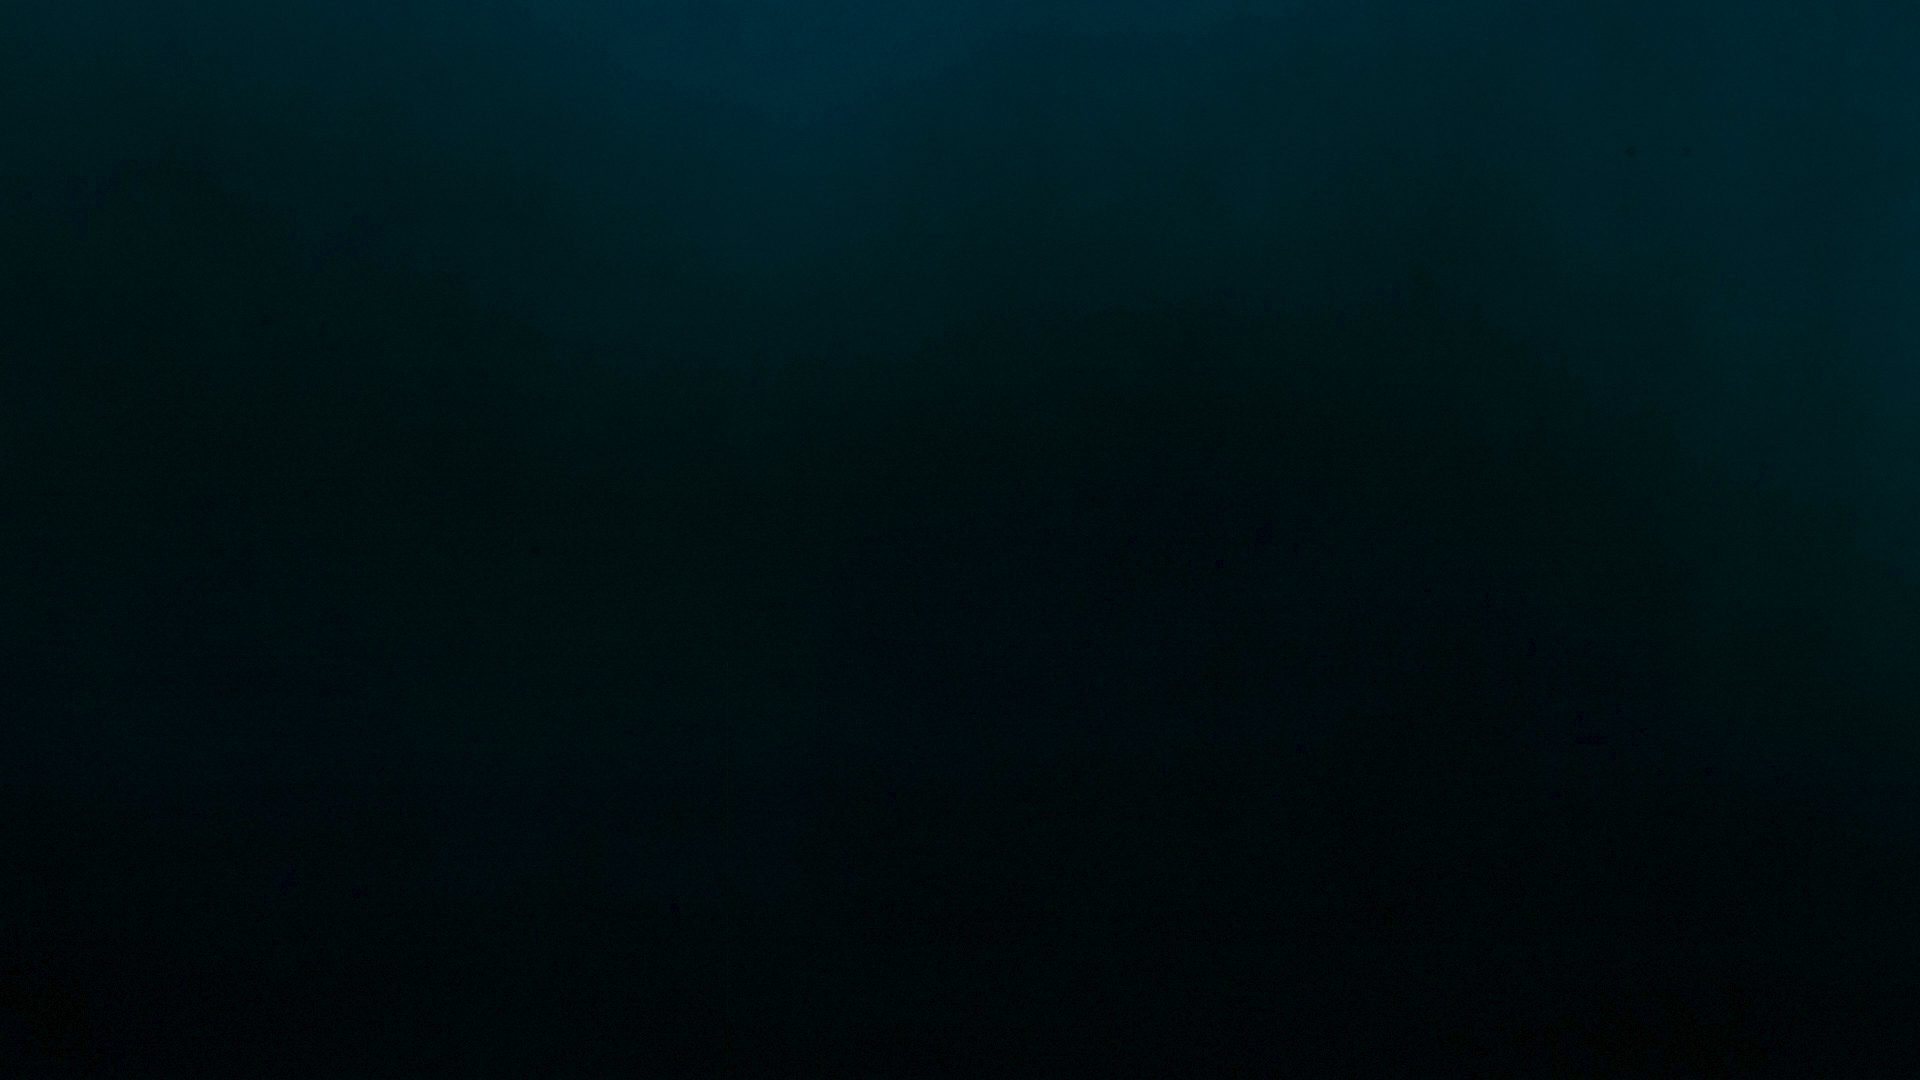 Teal Texture Abstract Cyan 1920x1080